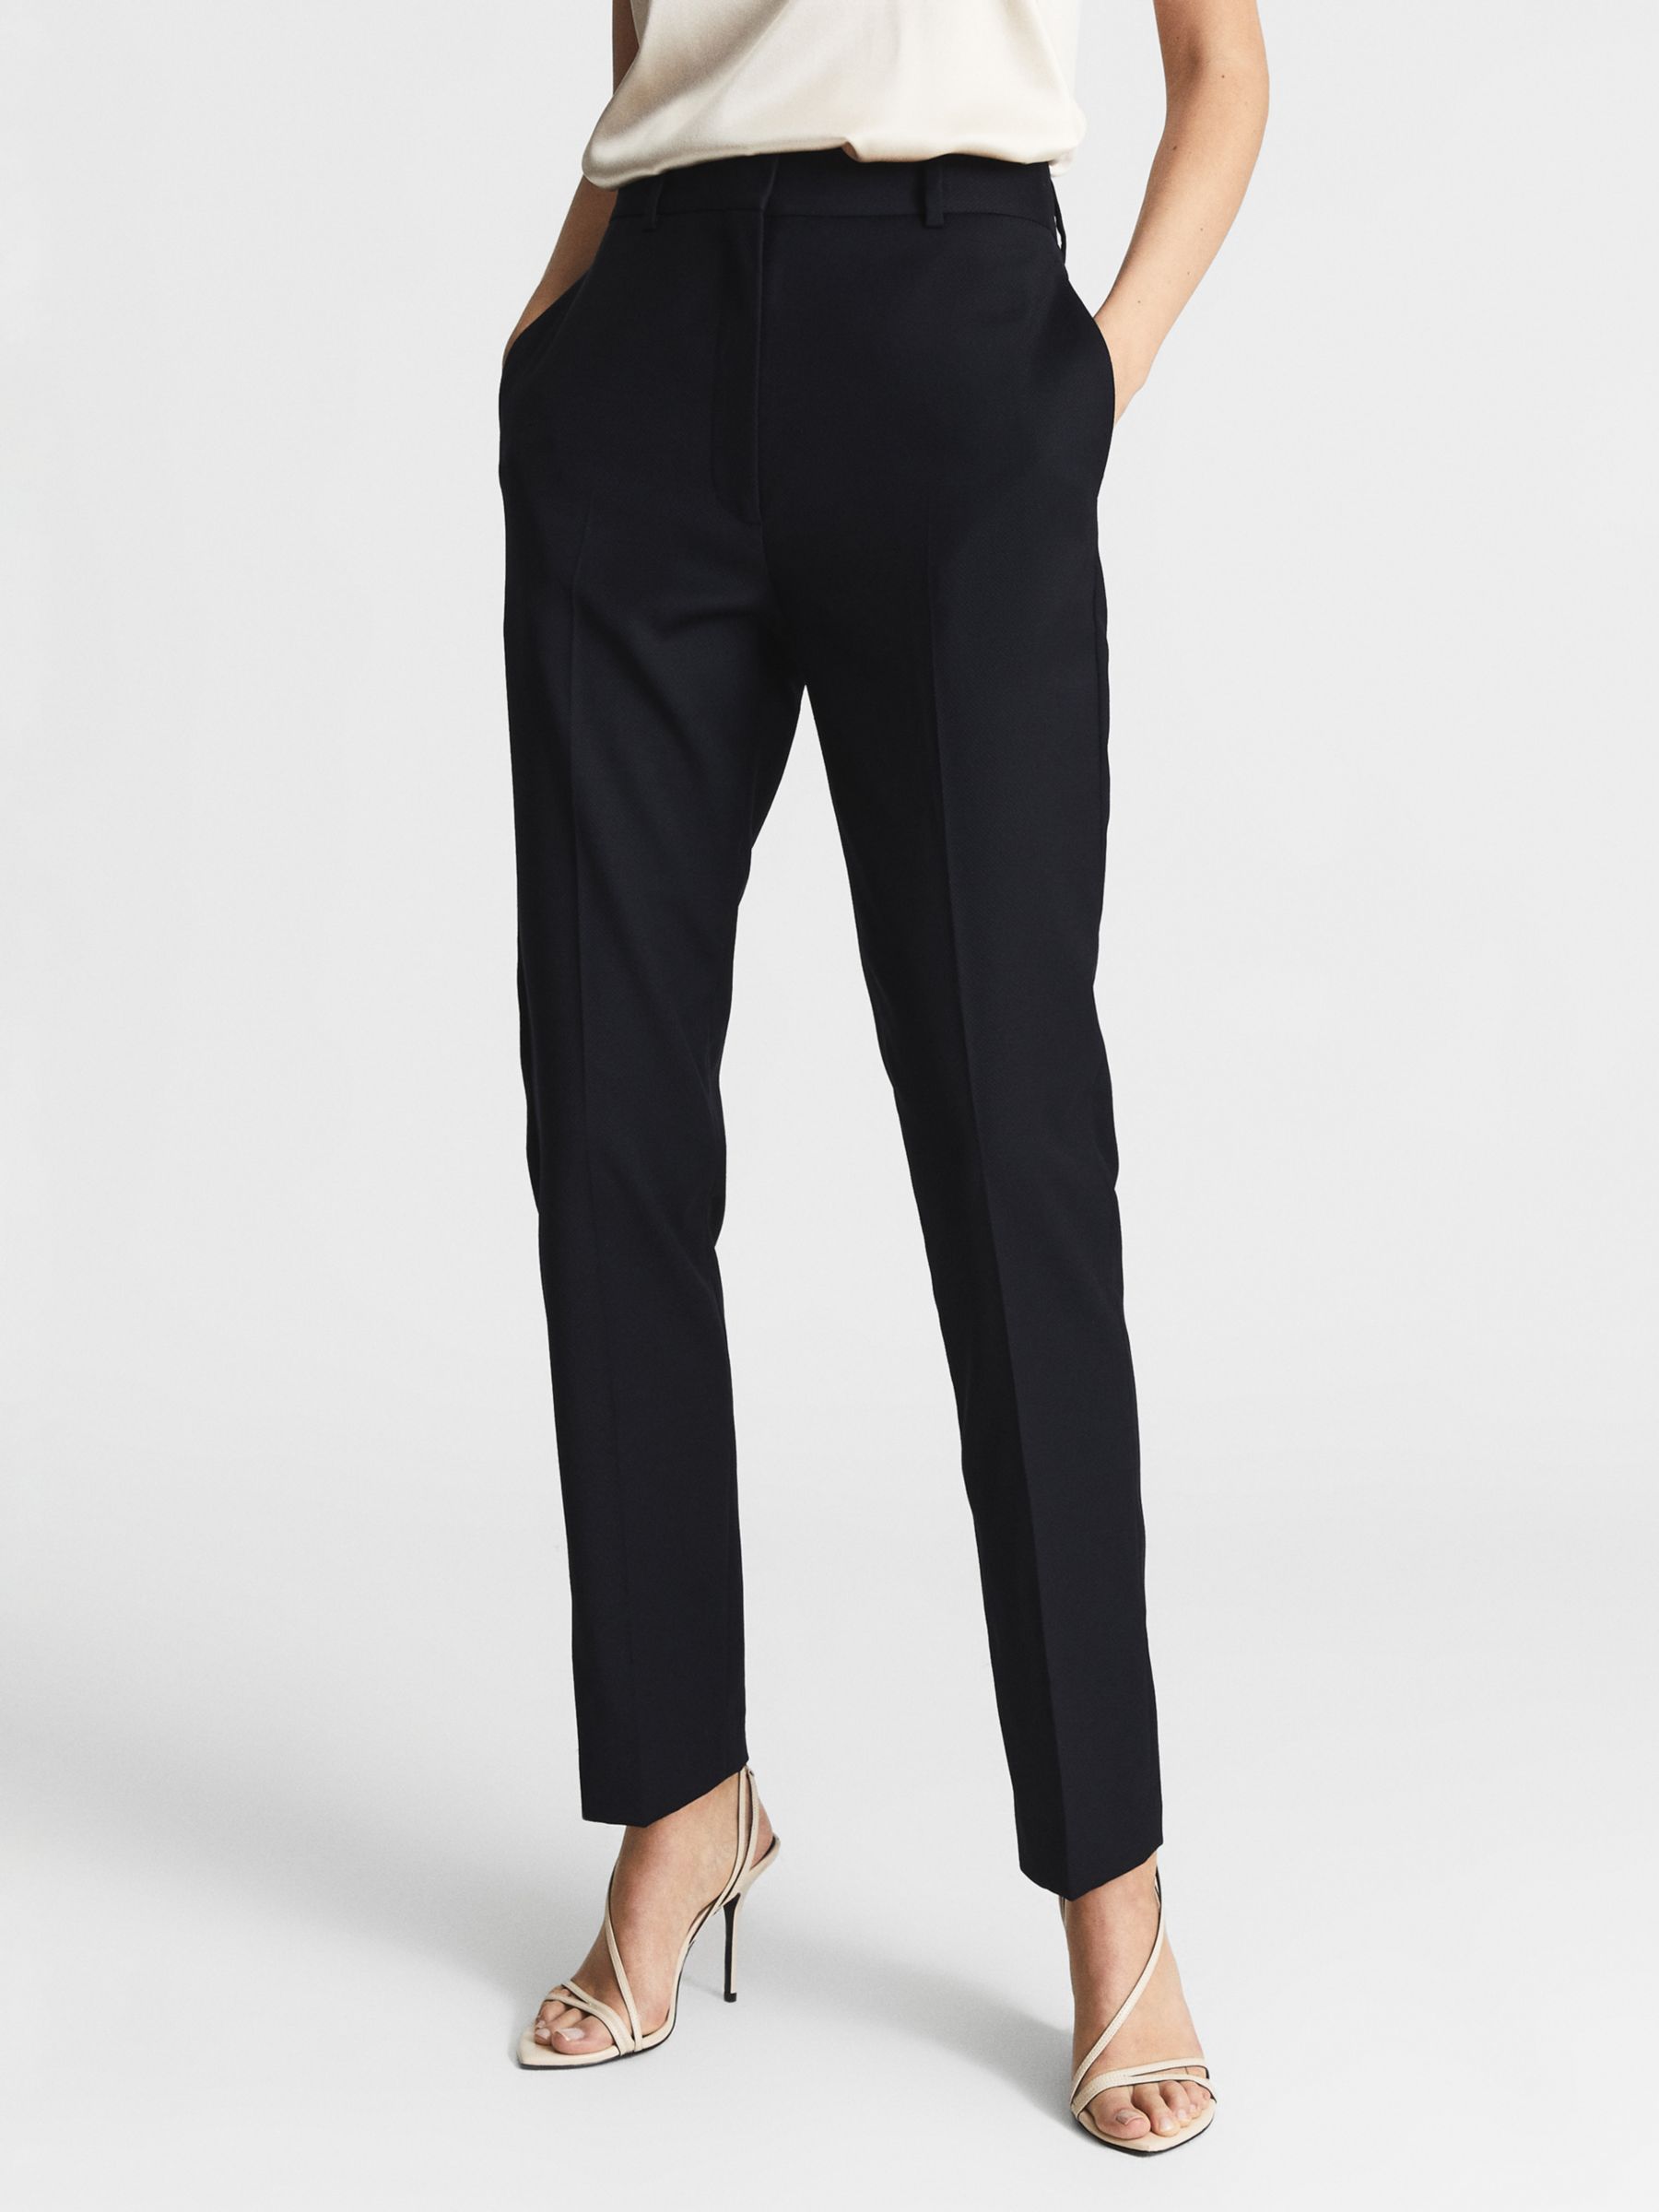 Reiss Petite Haisley Wool Blend Tapered Trousers, Navy at John Lewis ...